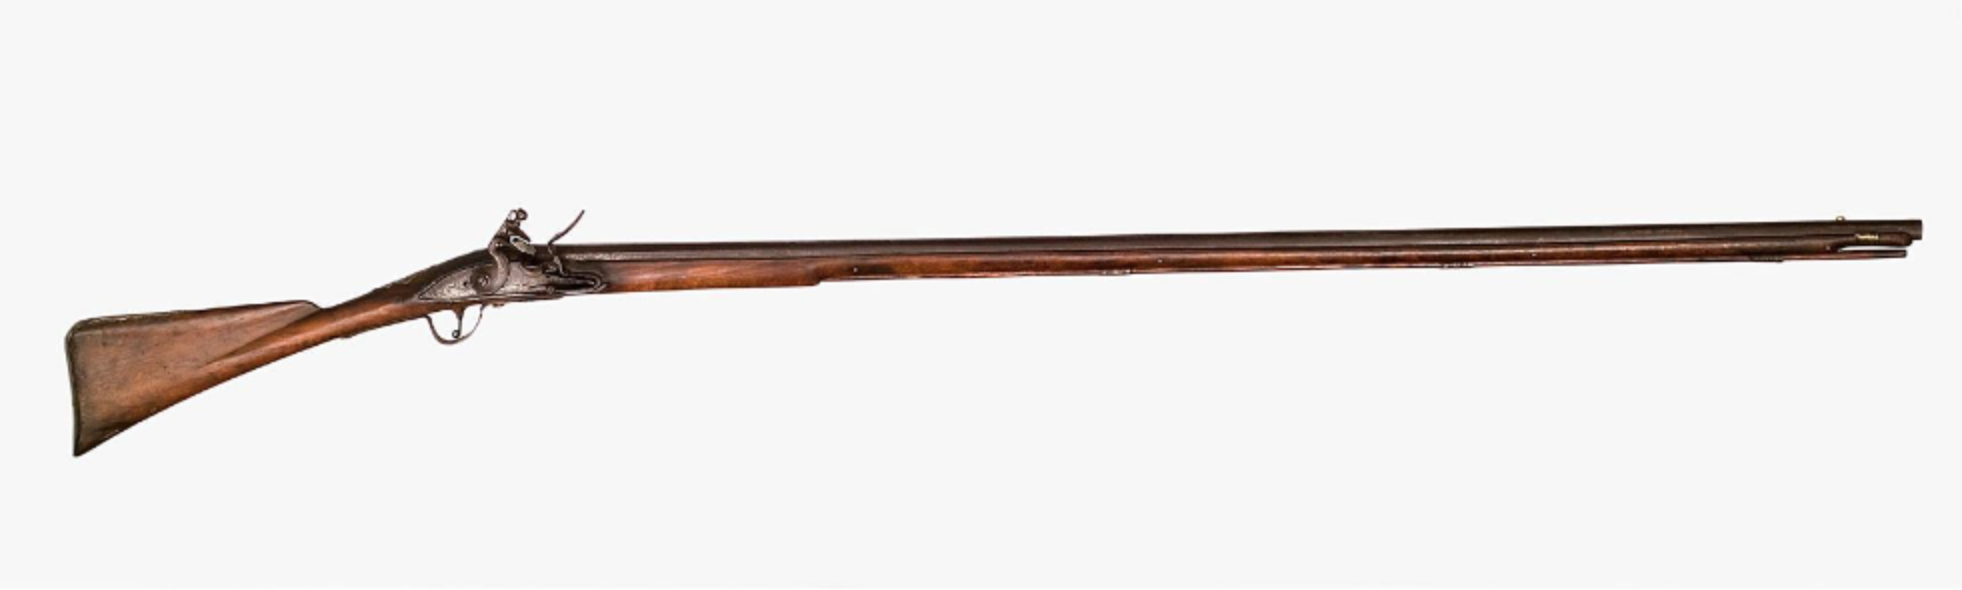 Fusil Guns on the Lewis and Clark Expedition (U.S. National Park Service)